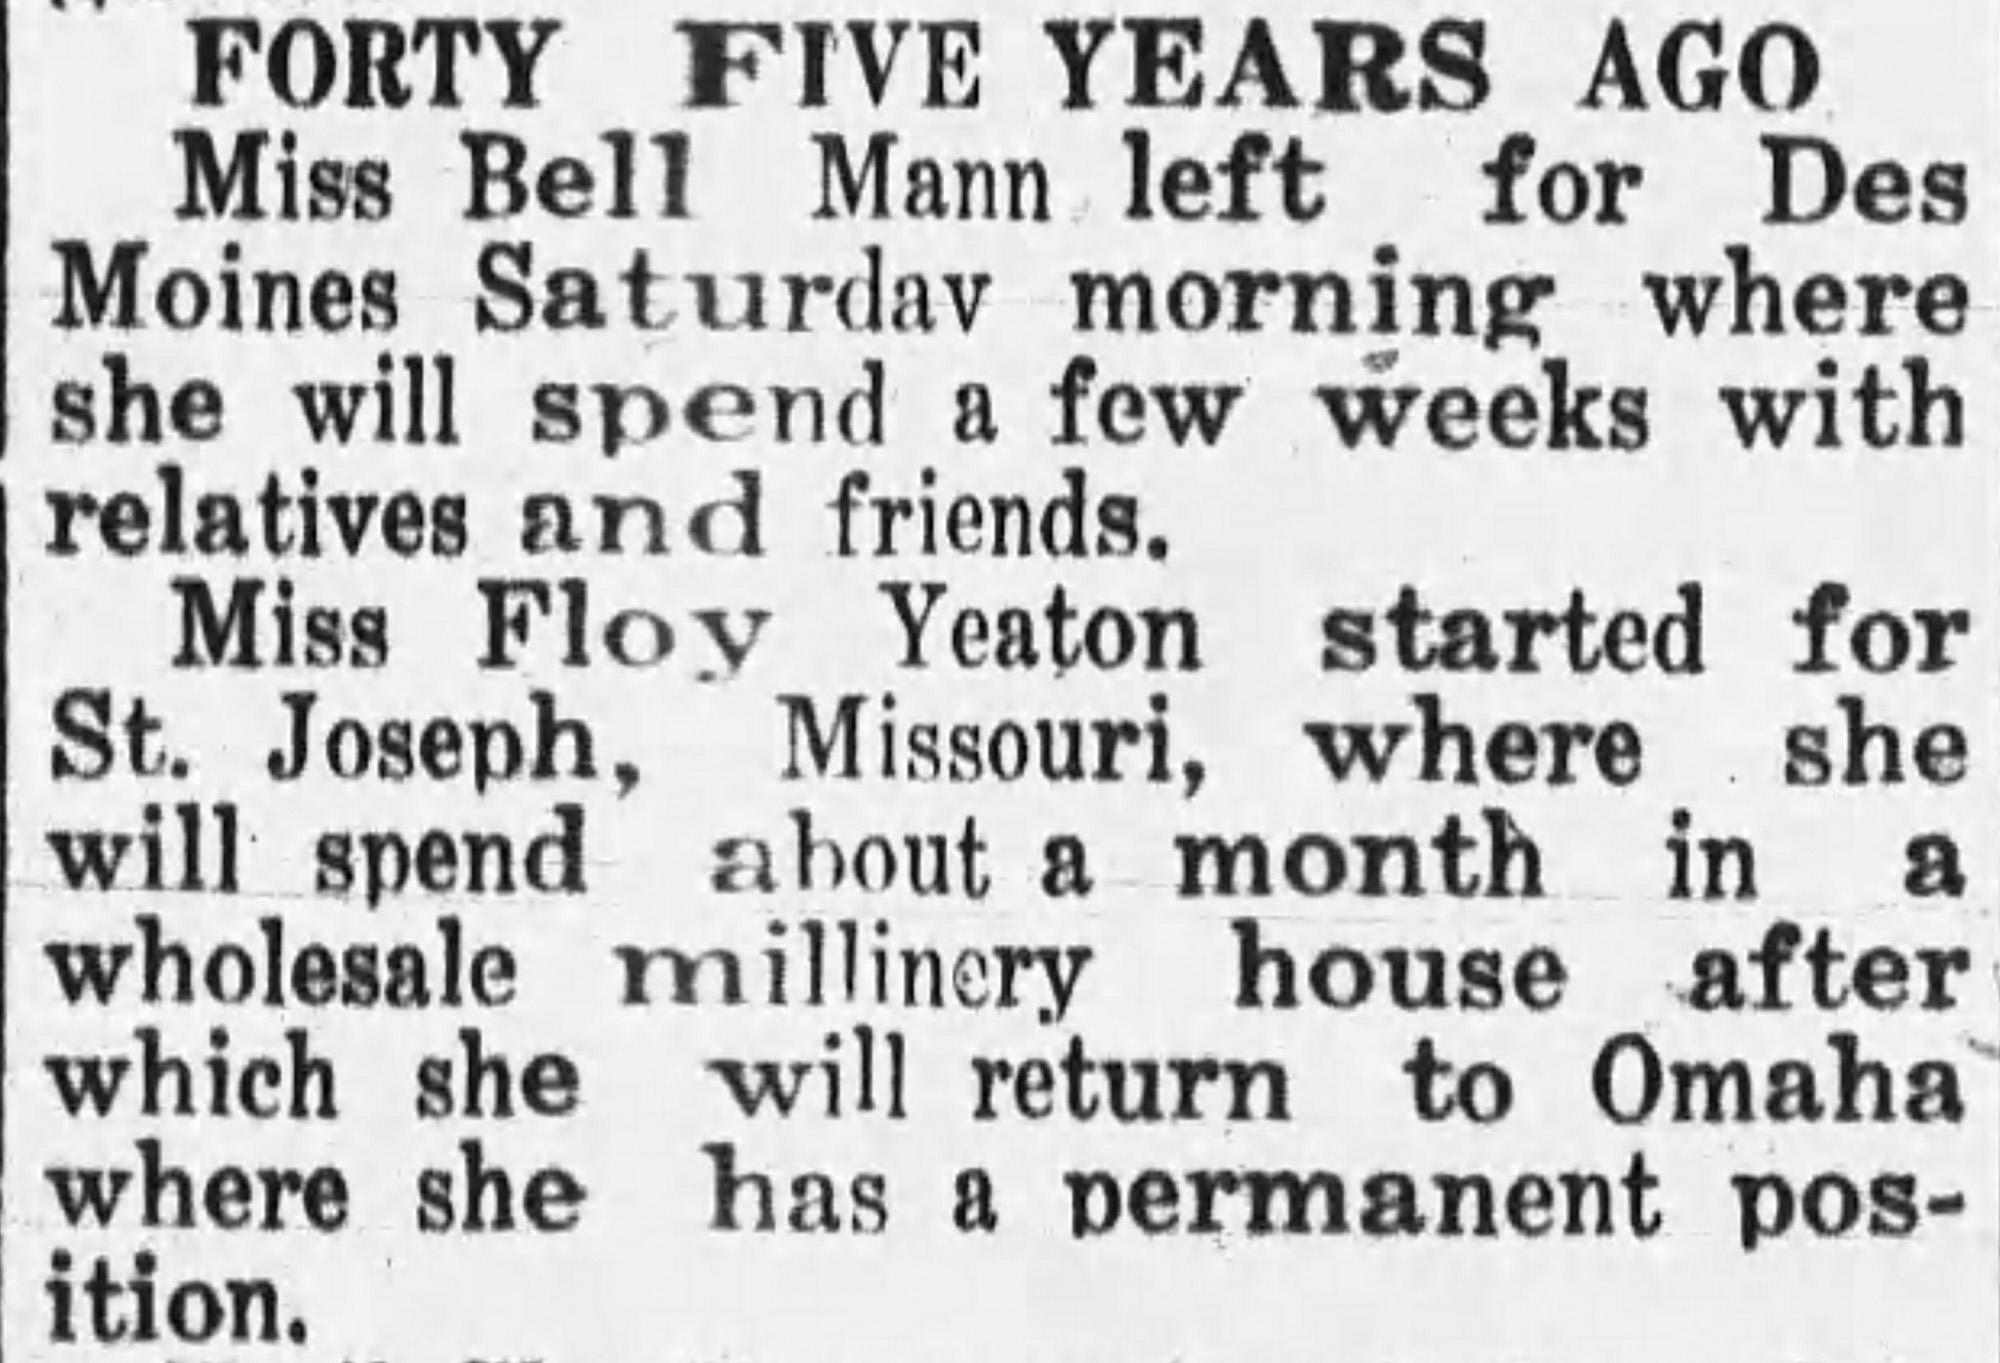 Dauth Family Archive - 1944-02-17 - The Lyons Mirror - Florence Yeaton Studing Millinery in St Joseph Missouri